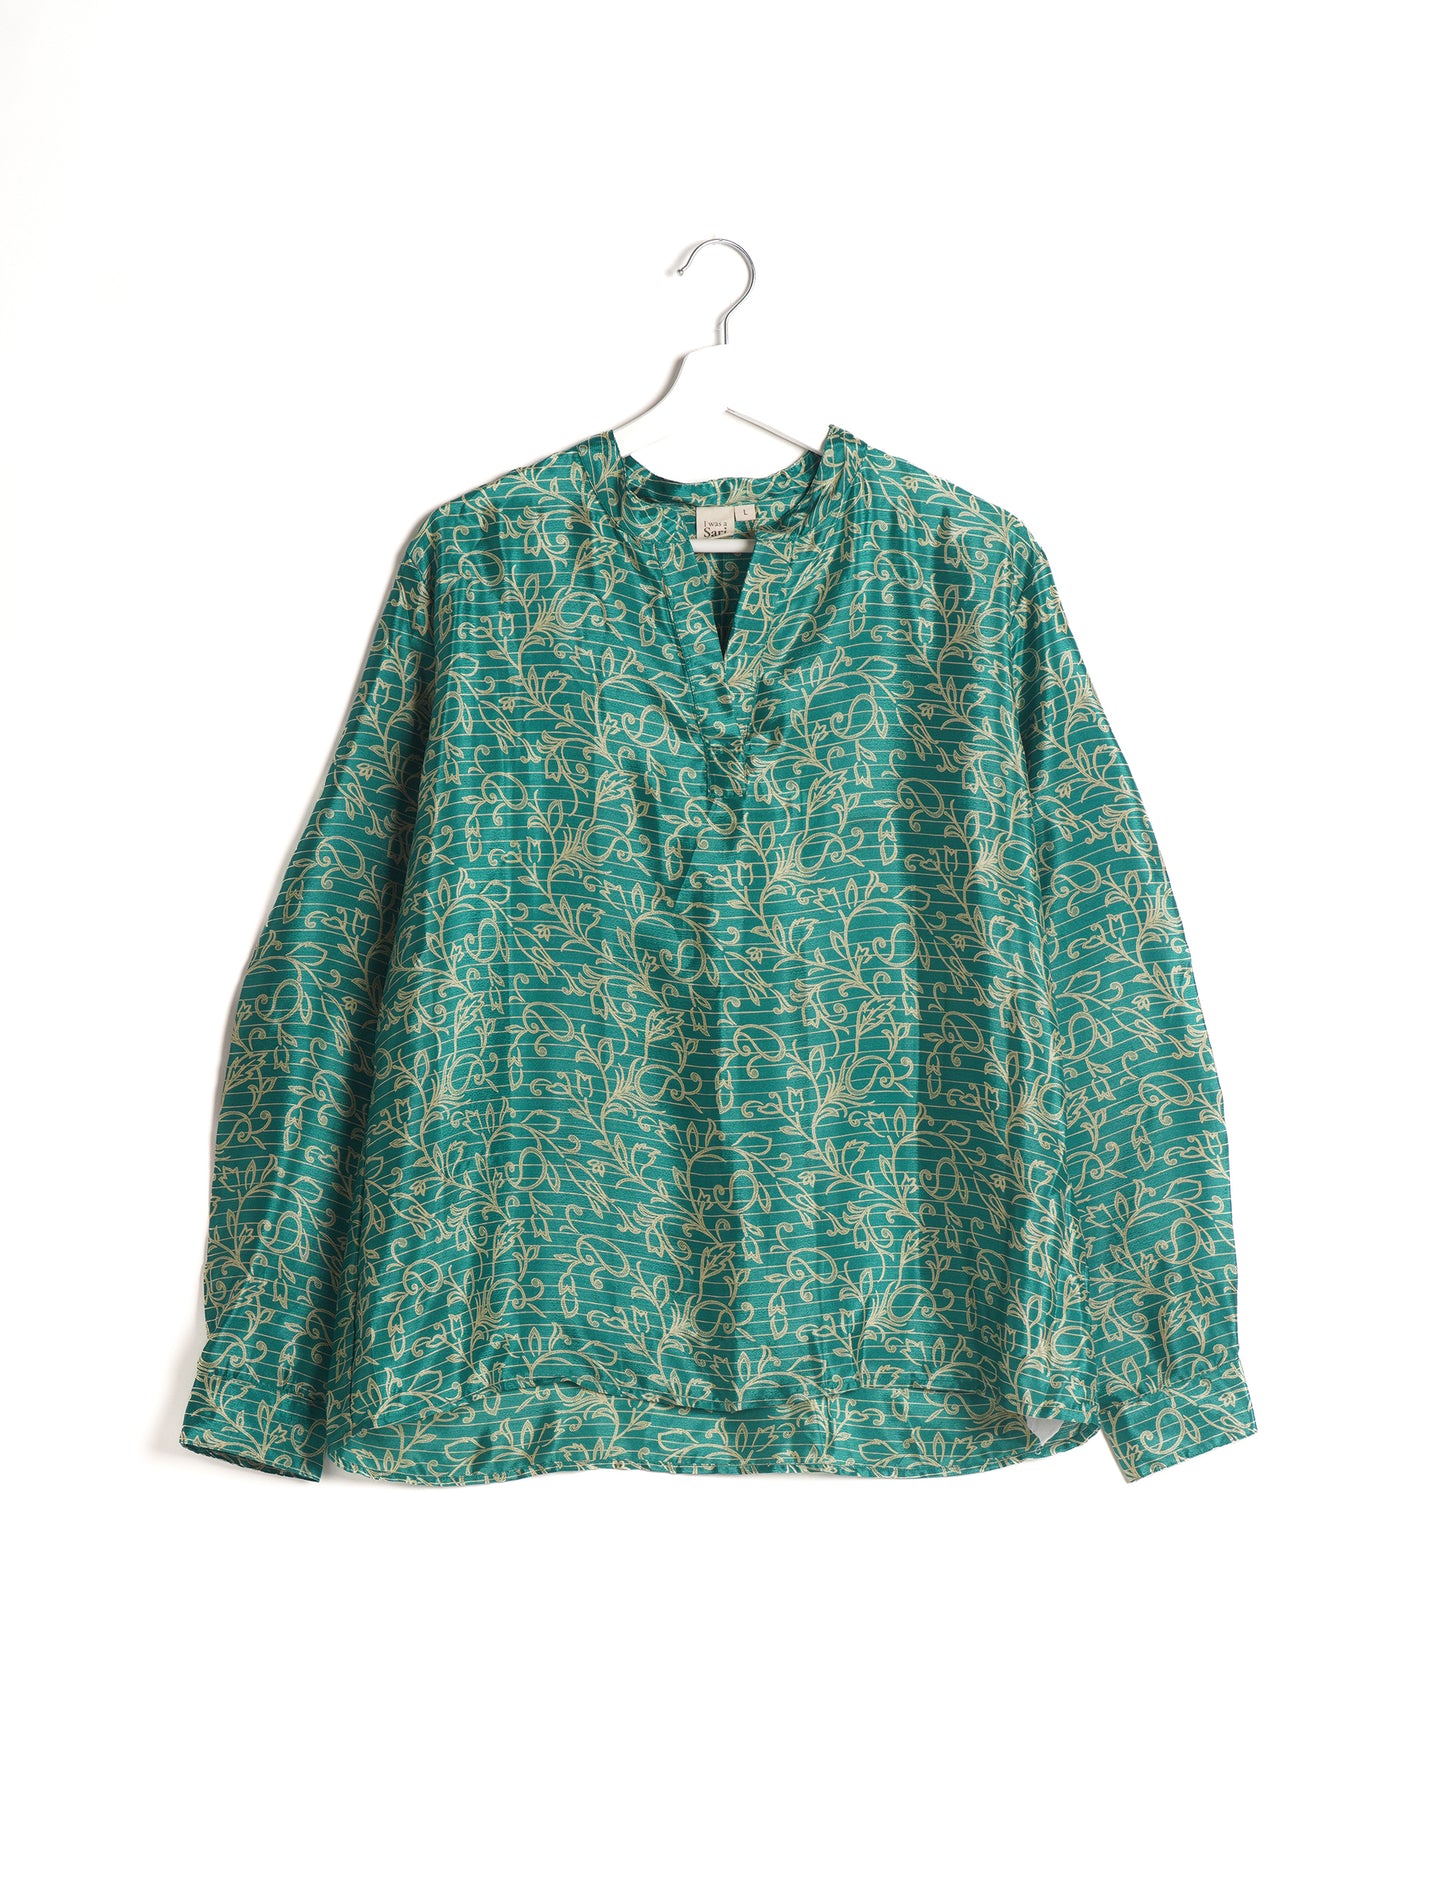 Versatile DAY BLOUSE, a sustainable wardrobe essential with a classic Johnny collar and full sleeves. Lightweight fabric for a comfortable fit, perfect for dressing up or down. Explore ethical clothing and green fashion with this eco-friendly and timeless piece, perfect for any occasion.